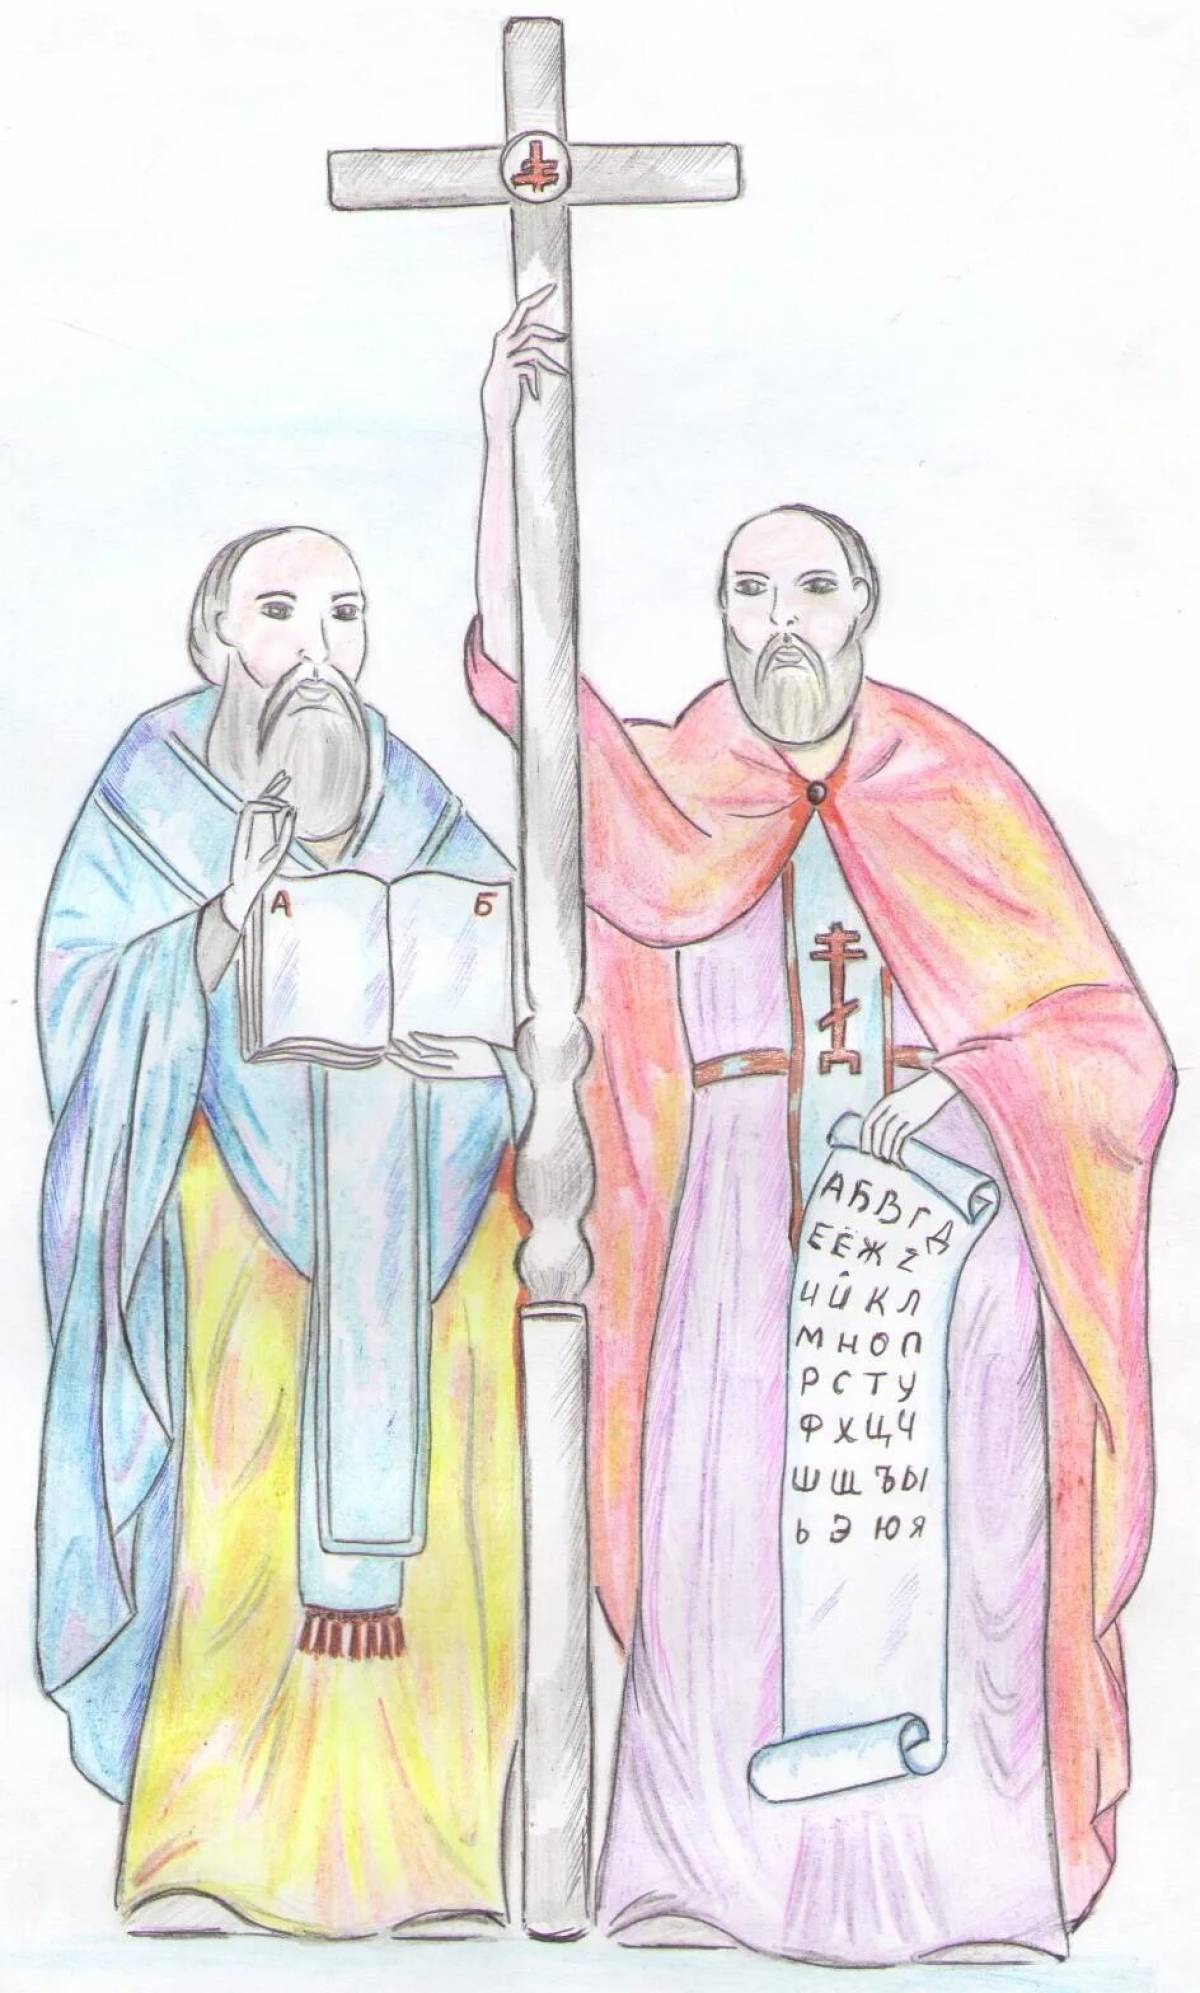 Fancy cyril and methodius coloring book